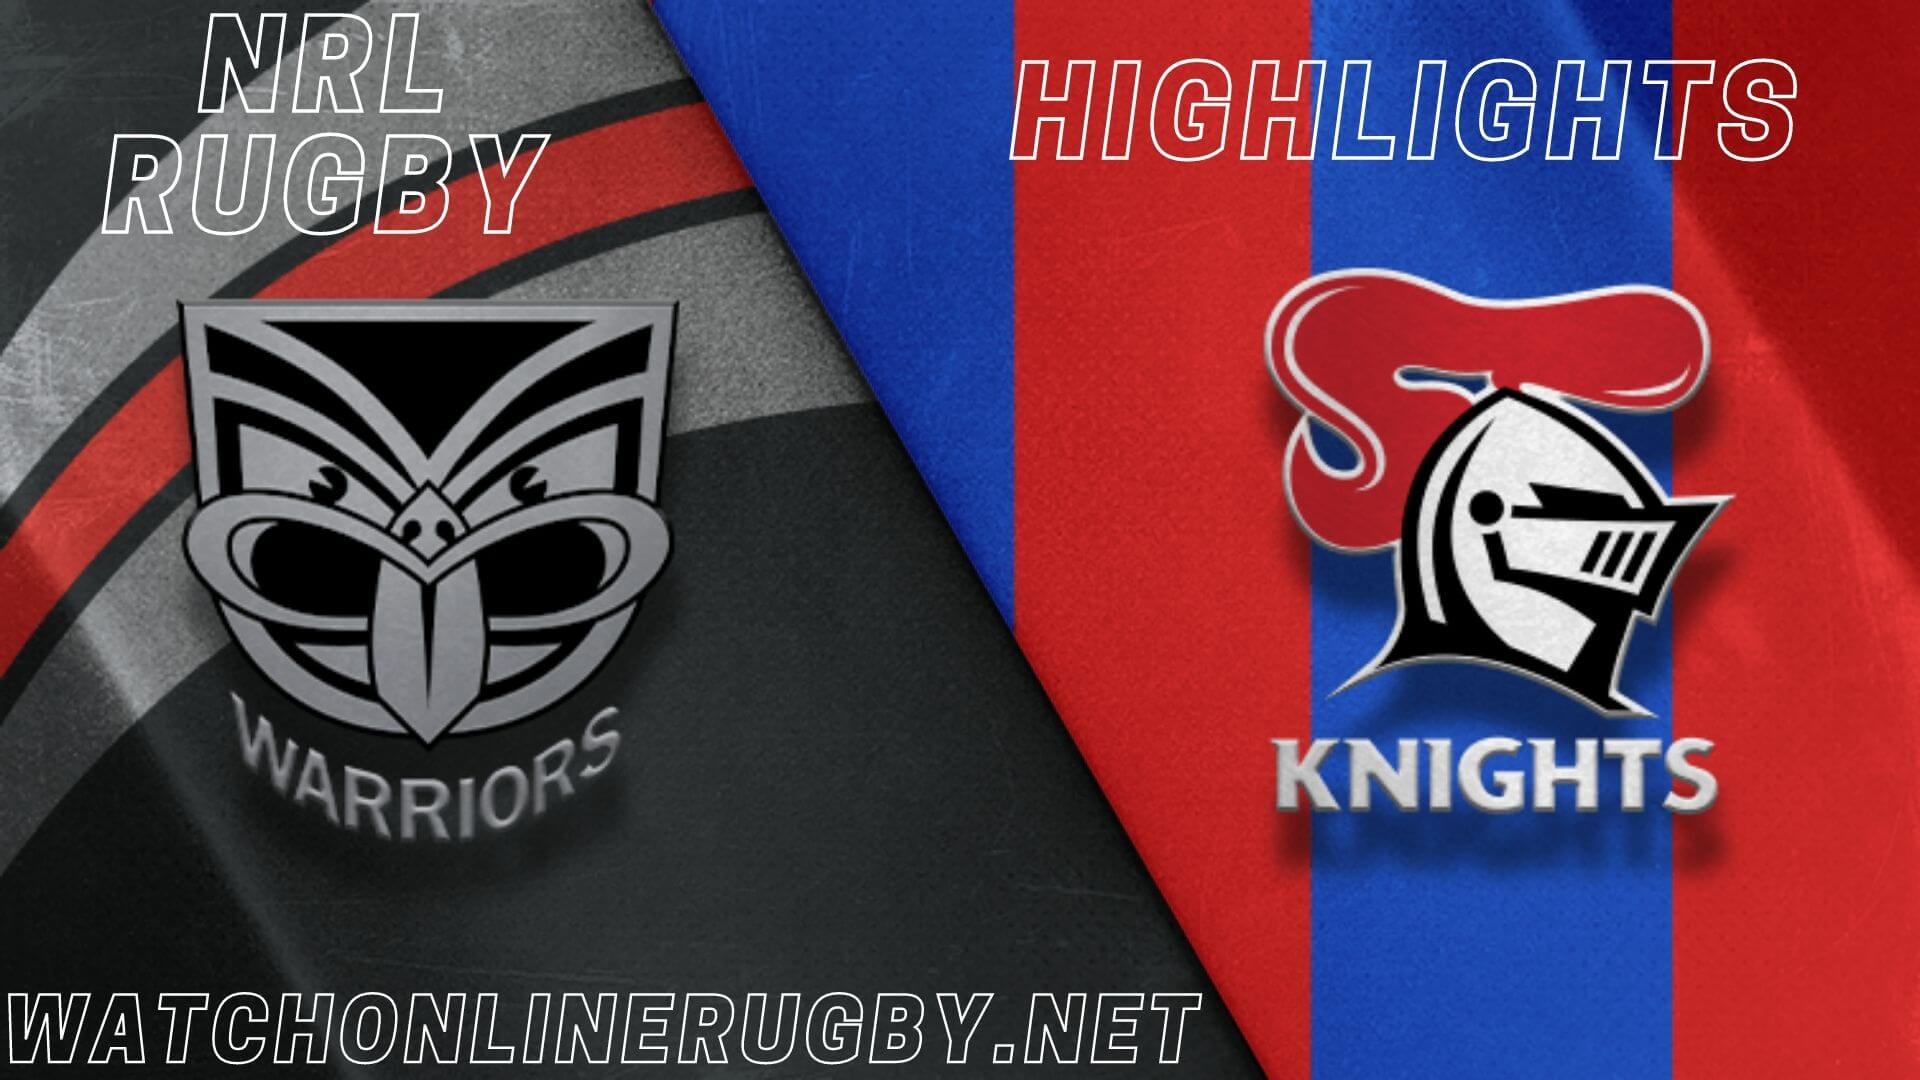 Warriors Vs Knights Highlights RD 12 NRL Rugby